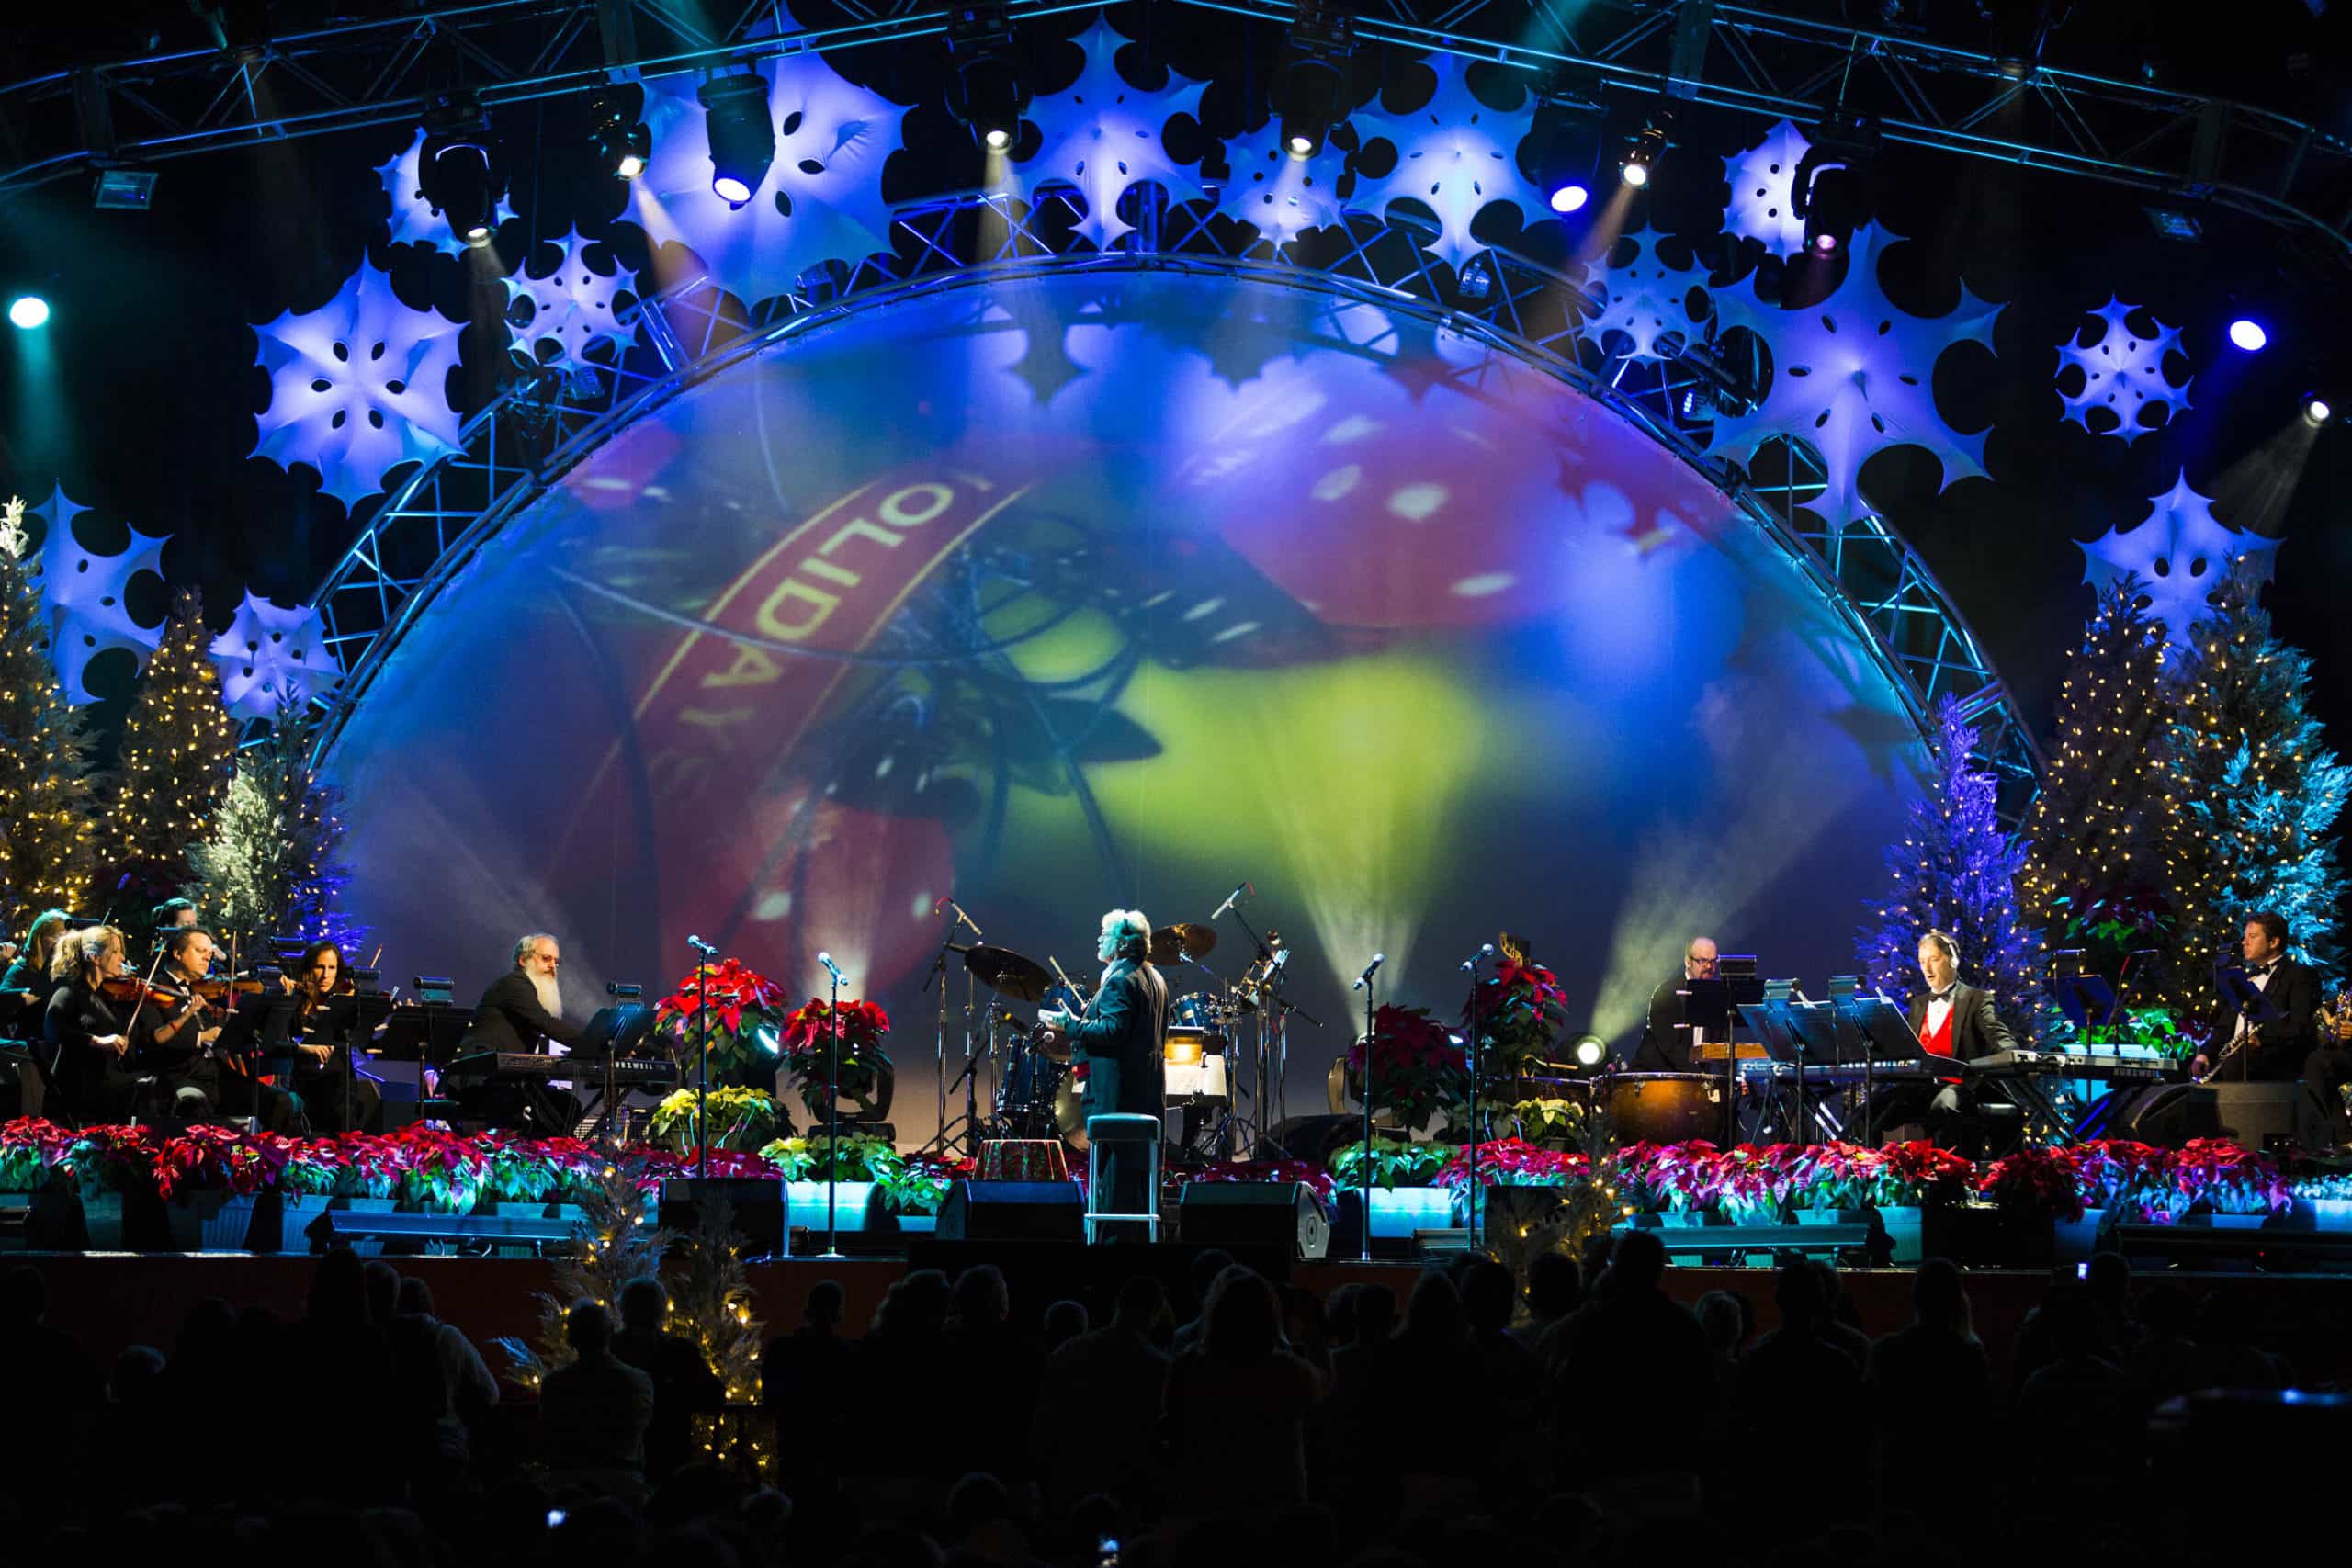 Mannheim Steamroller Concerts, Holiday Food, and More Announced for